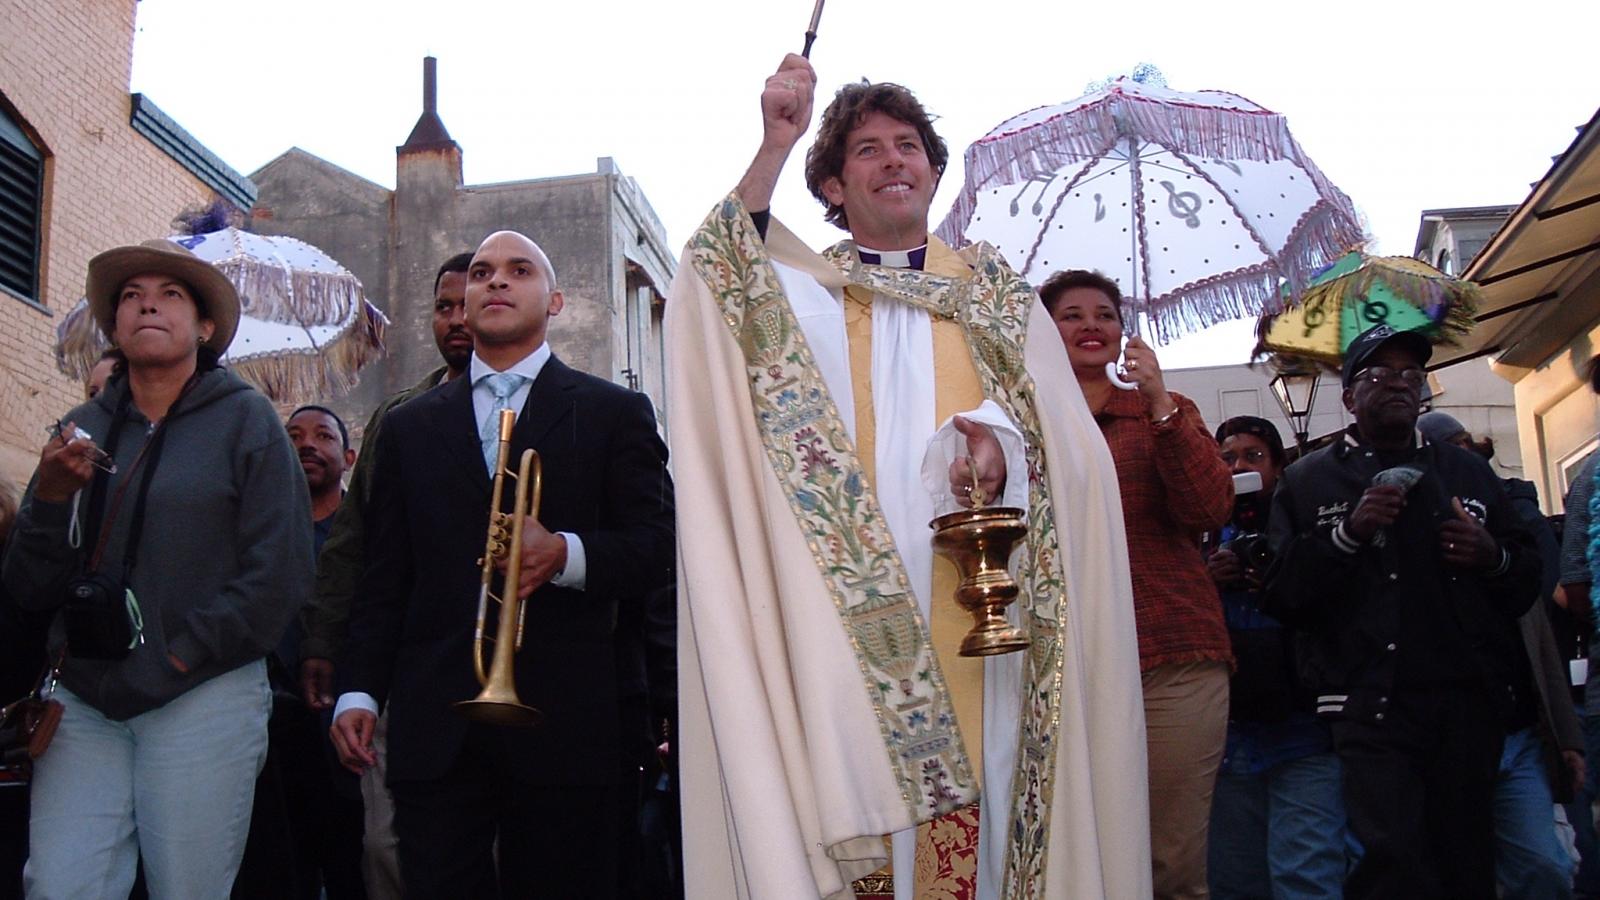 Man with trumpet next to priest blessing crowd in parade down street. 